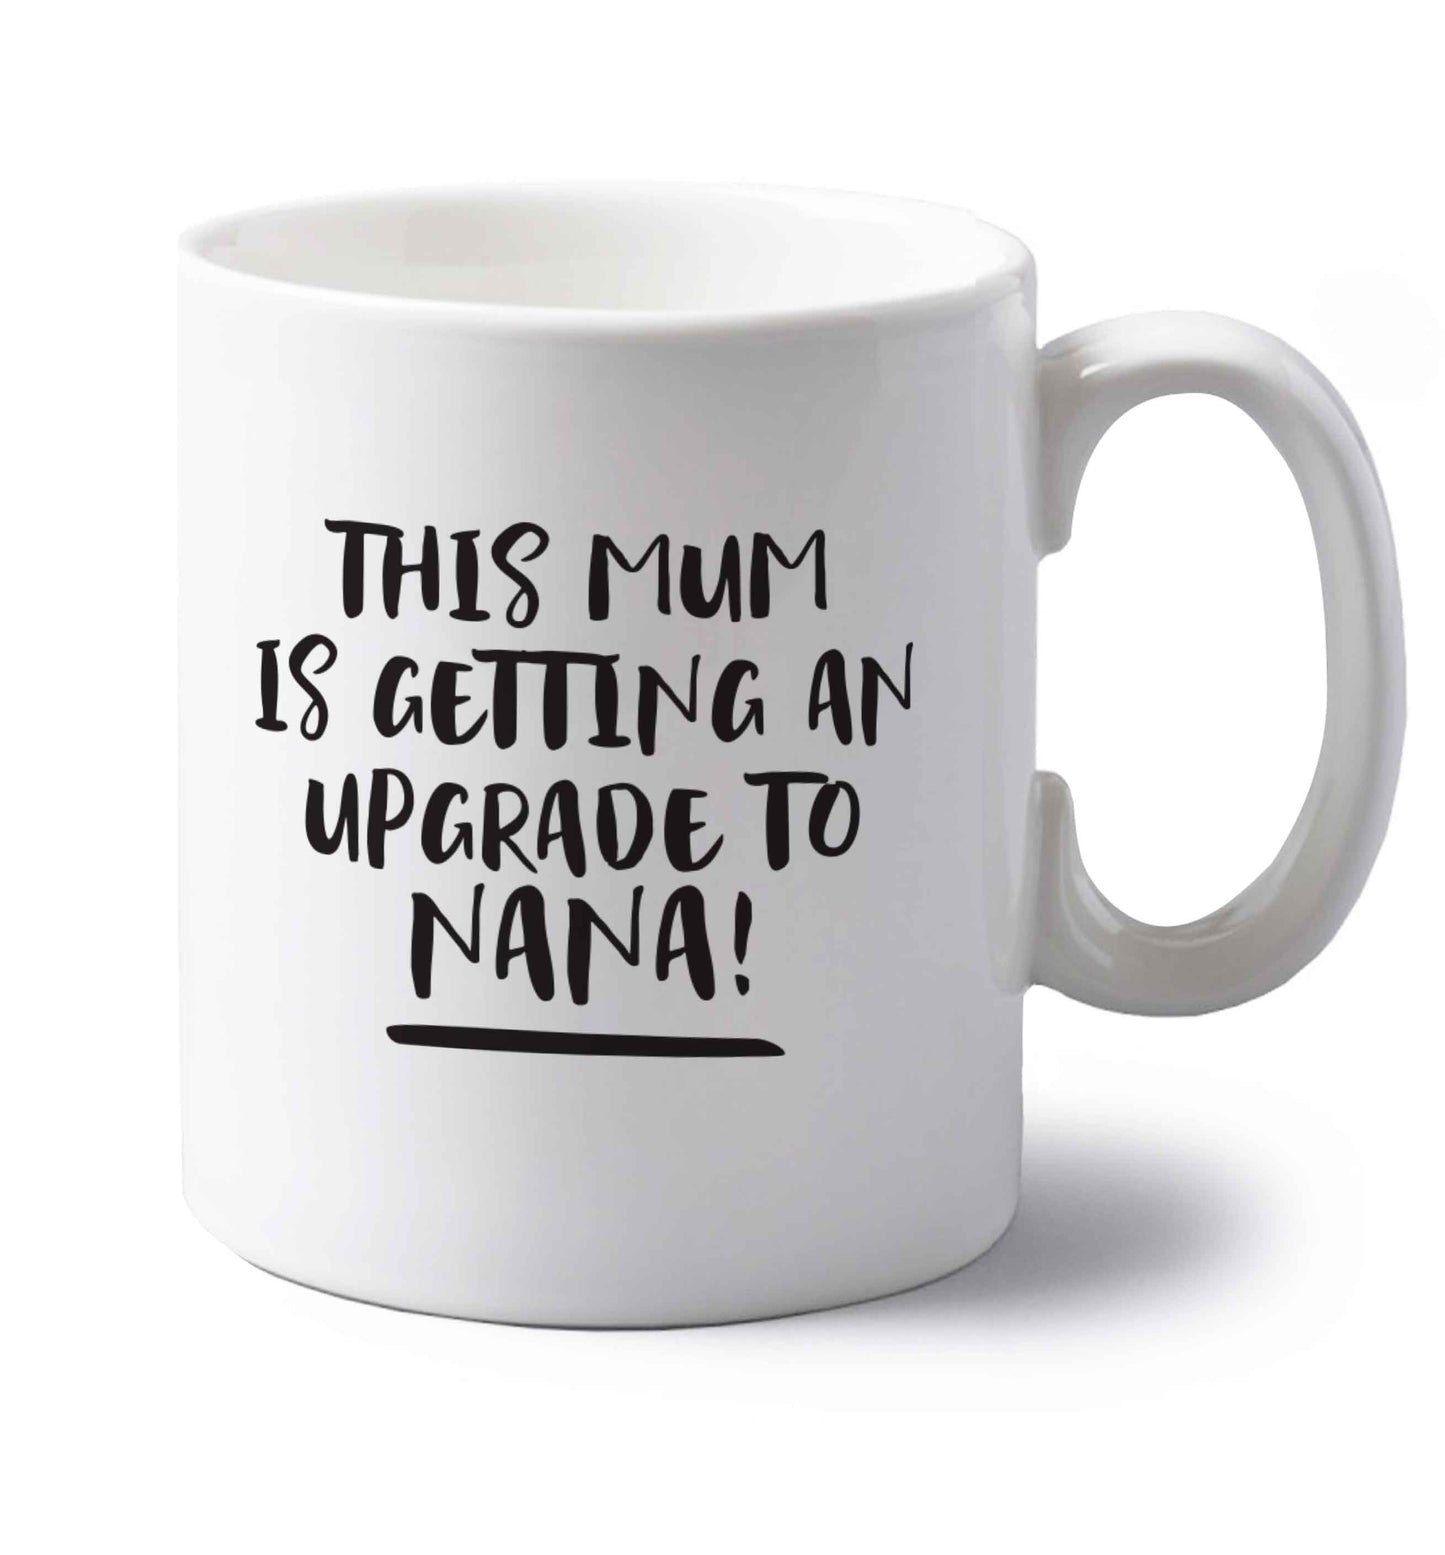 This mum is getting an upgrade to nana! left handed white ceramic mug 